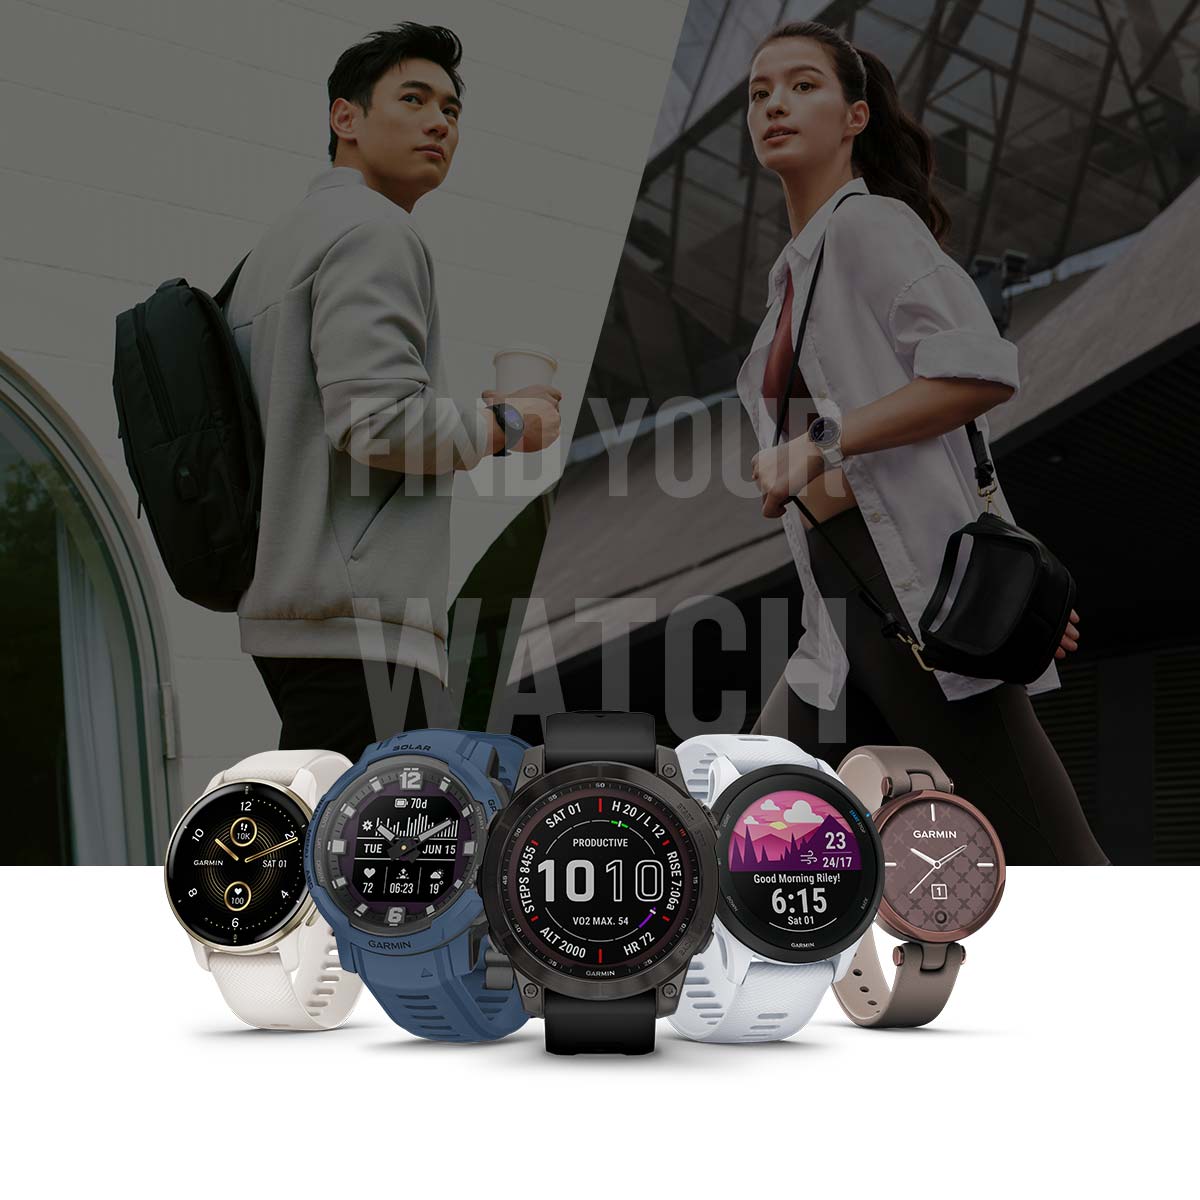 Modern smart watch with sim card For Fitness And Health 